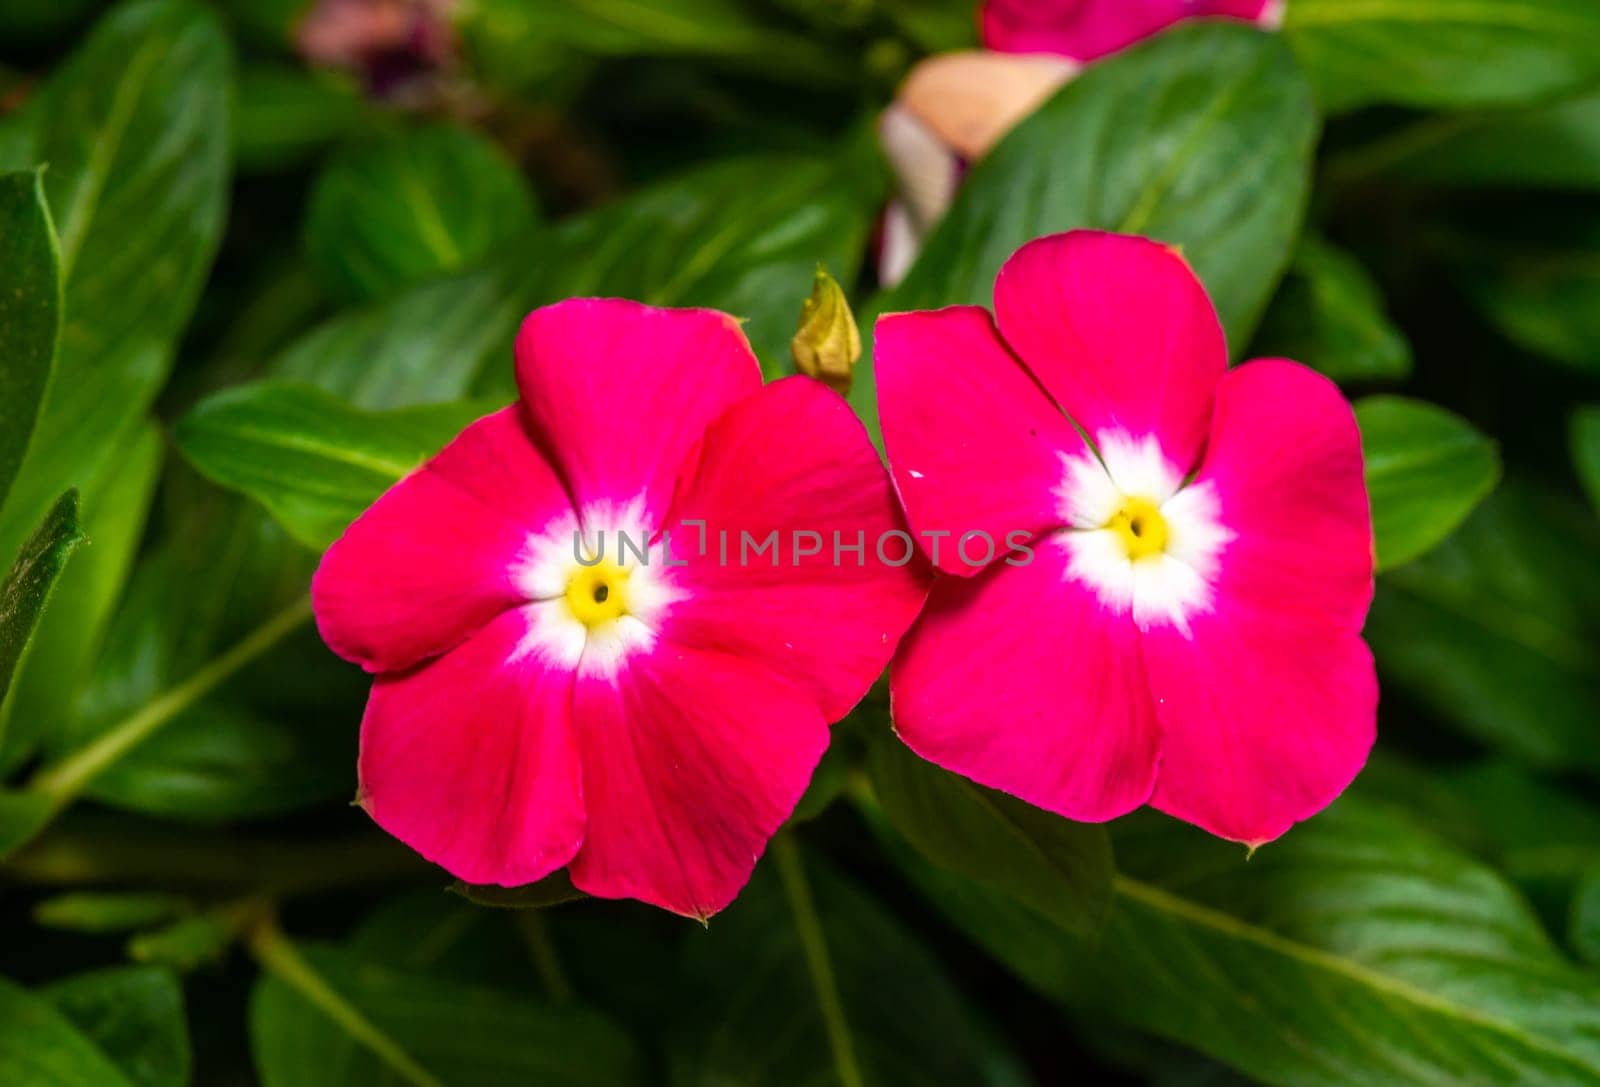 Catharanthus roseus - close-up of flowers of a plant with red petals by Hydrobiolog